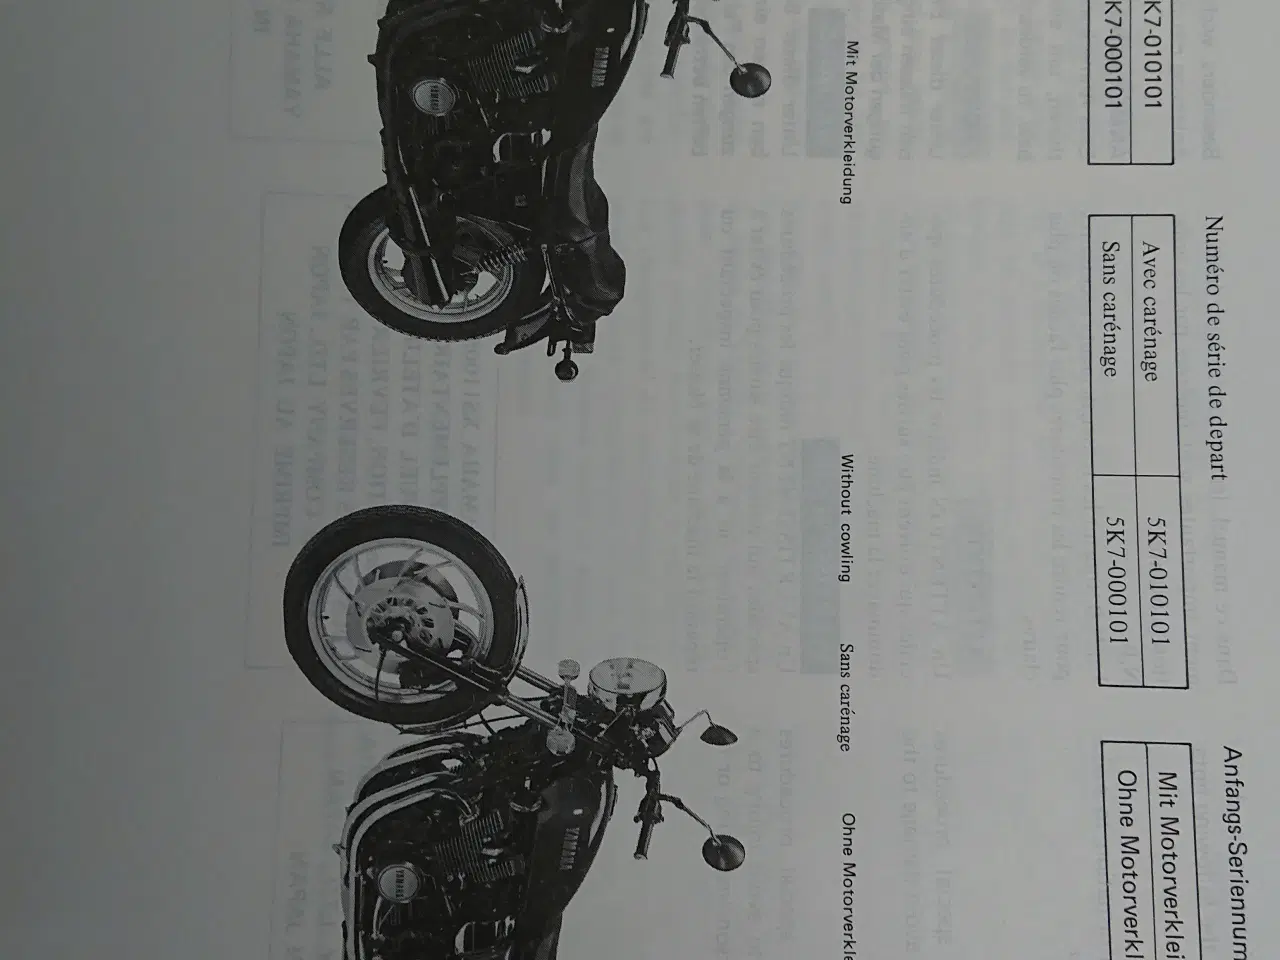 Billede 2 - services manual Yamaha XS100S+owners book